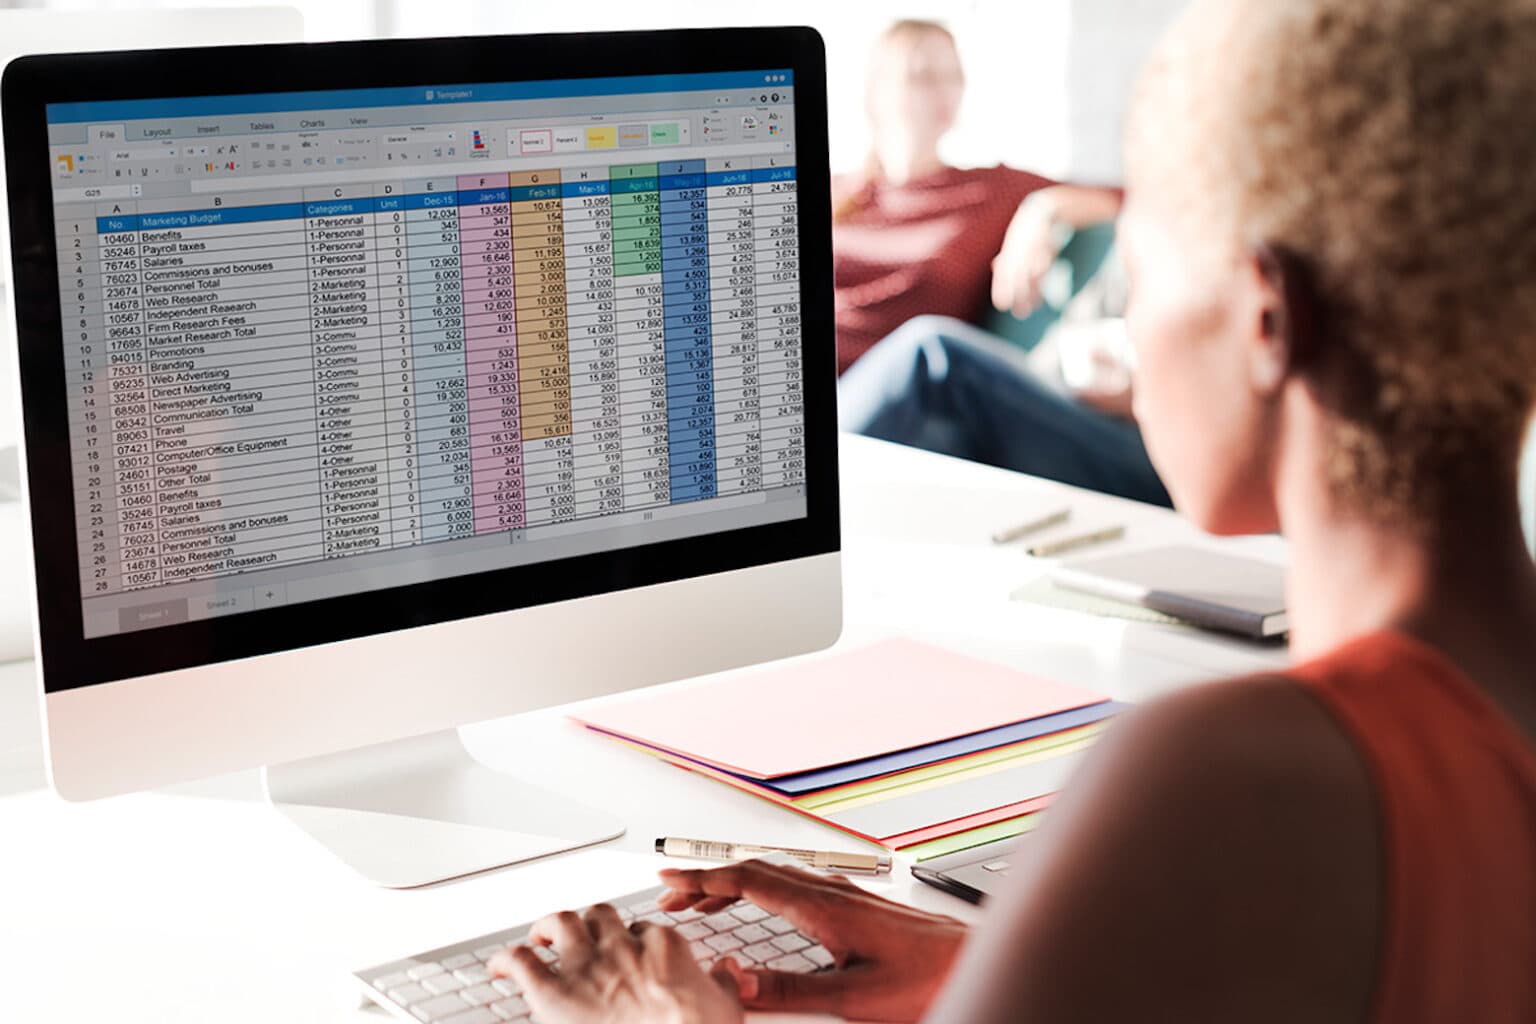 Learn Excel from the experts with this training bundle.